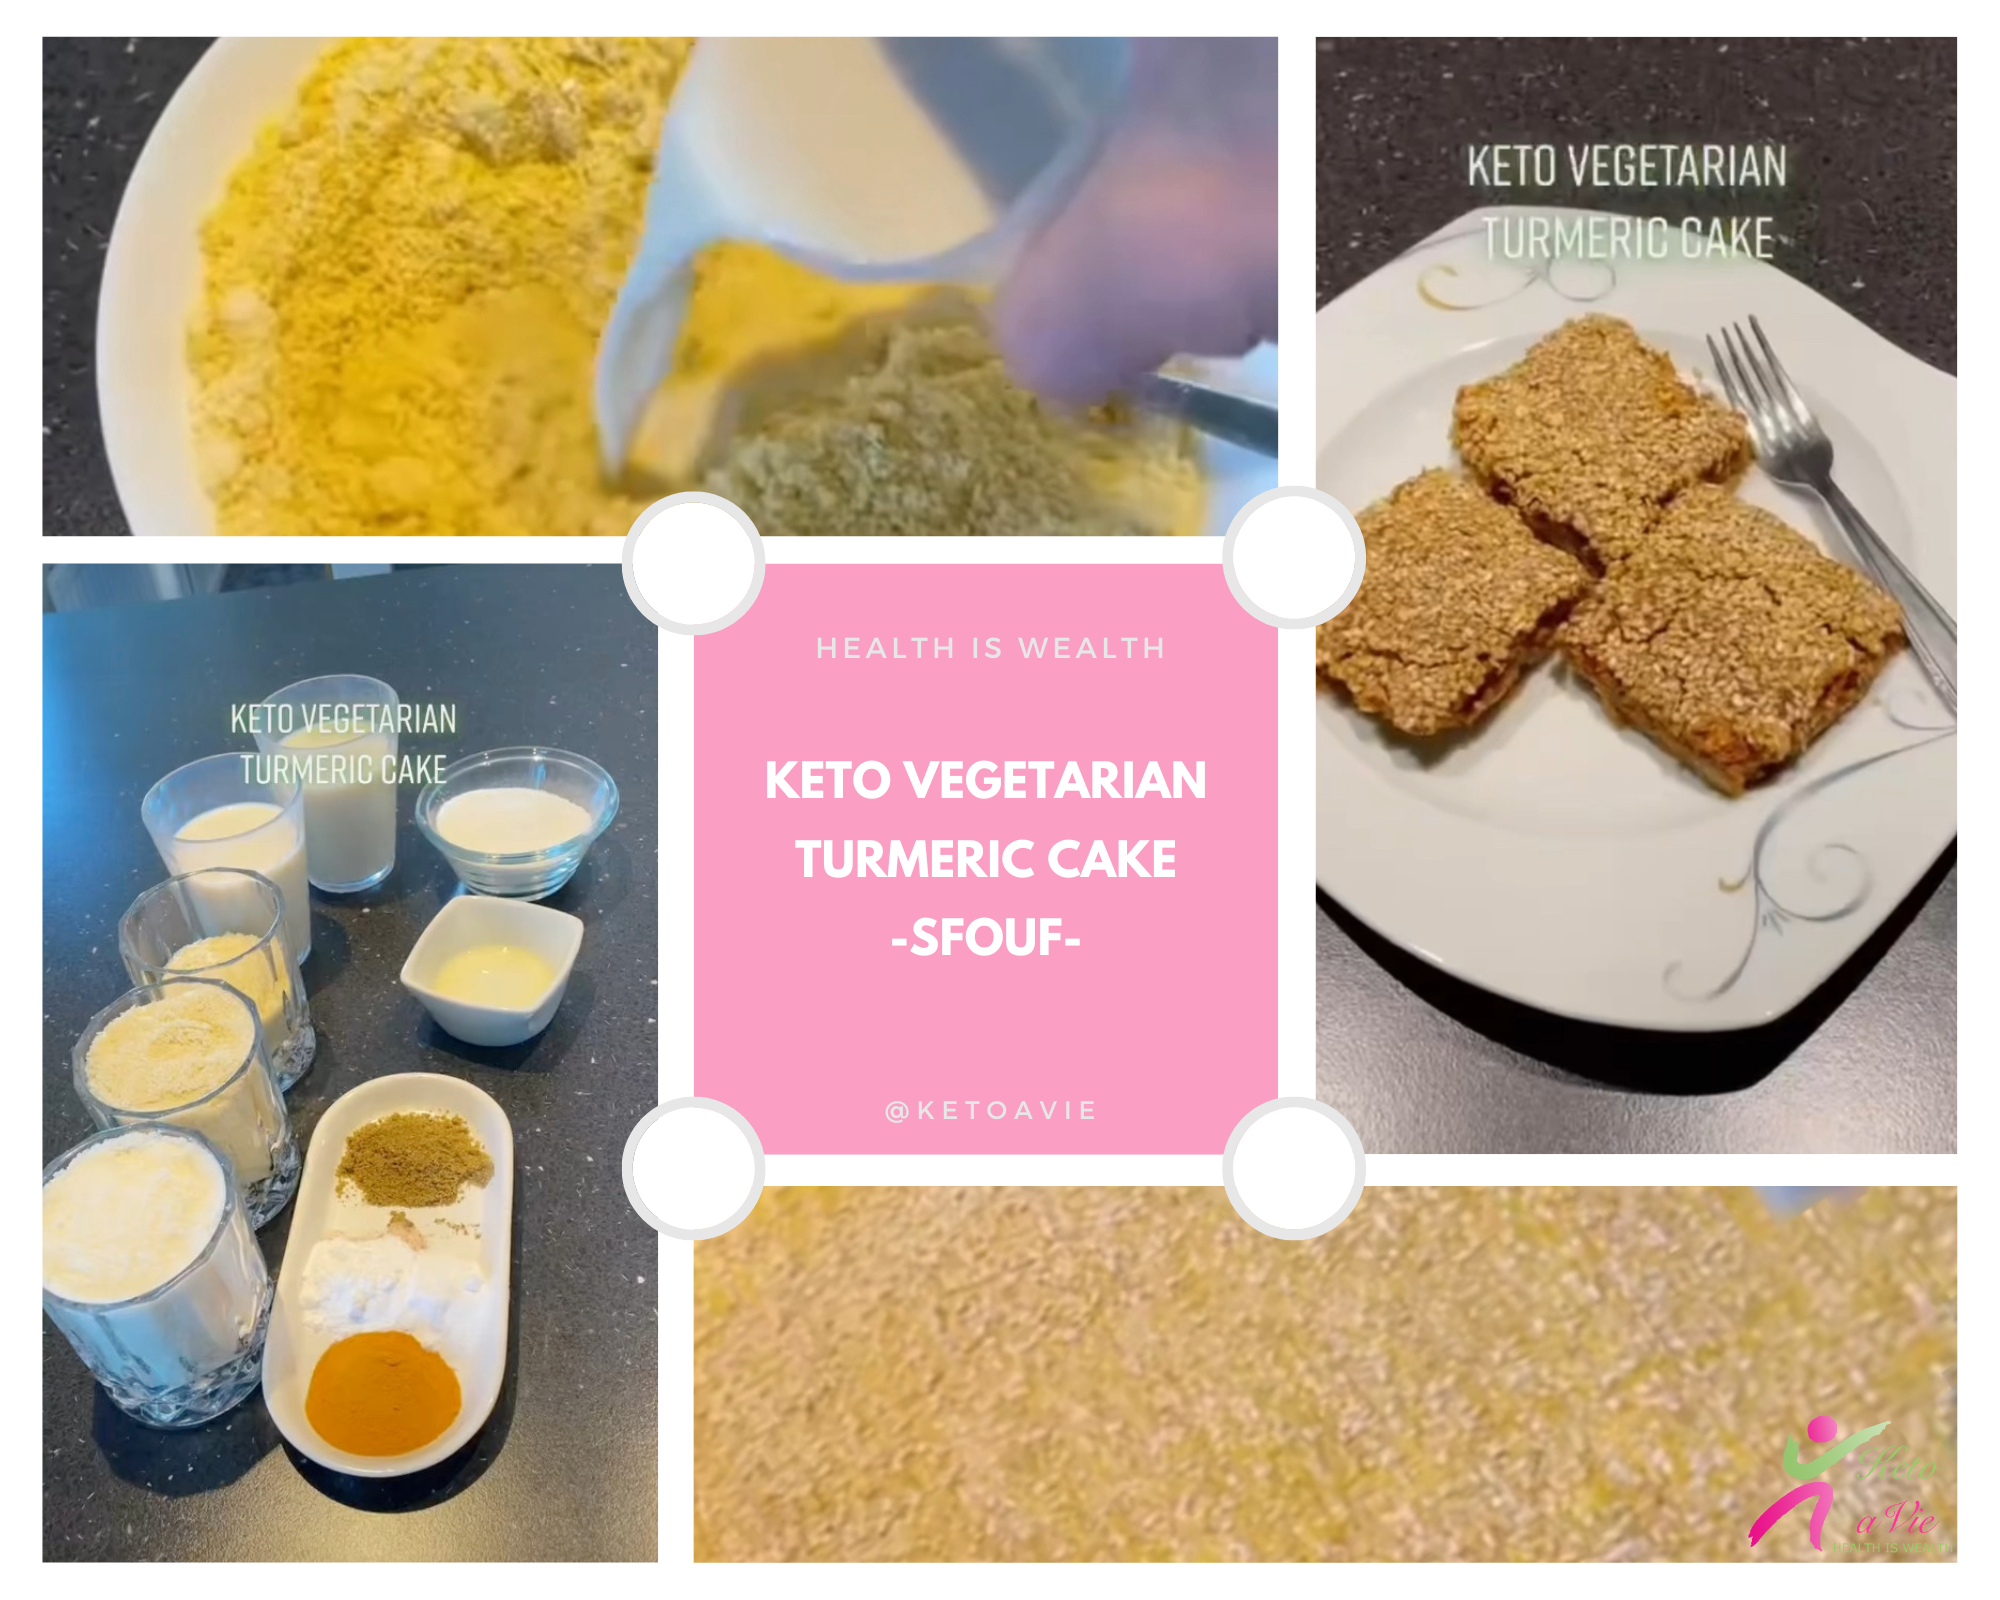 Step-by-step guide on how to prepare our Keto Vegetarian Turmeric Cake